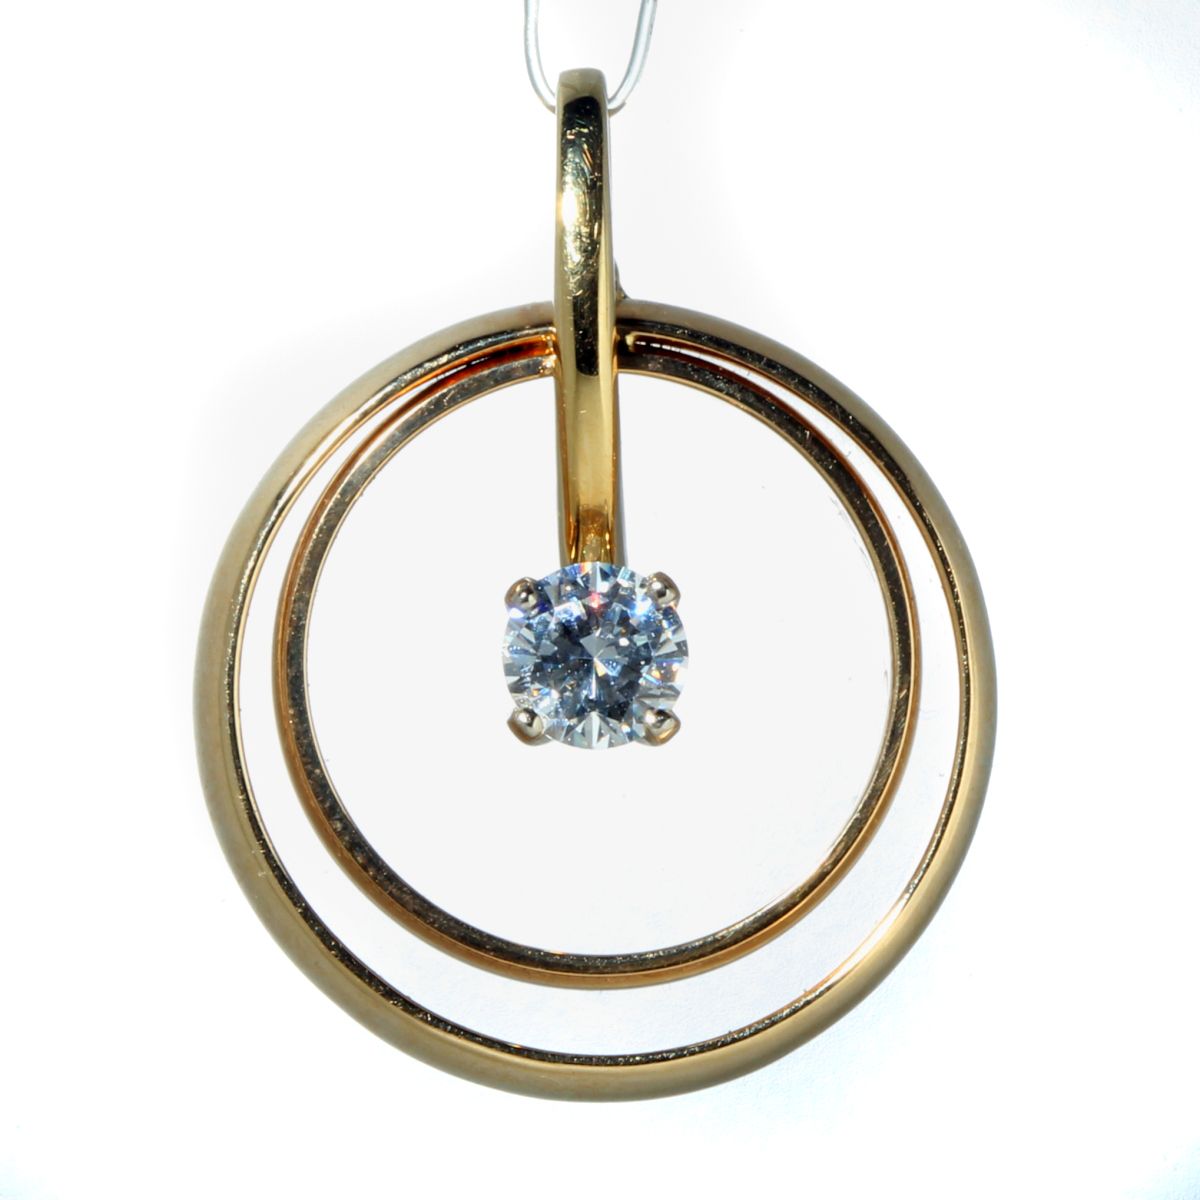 Ring Pendant Necklace with Cushion Square Swarovski Crystal, 15,99 €